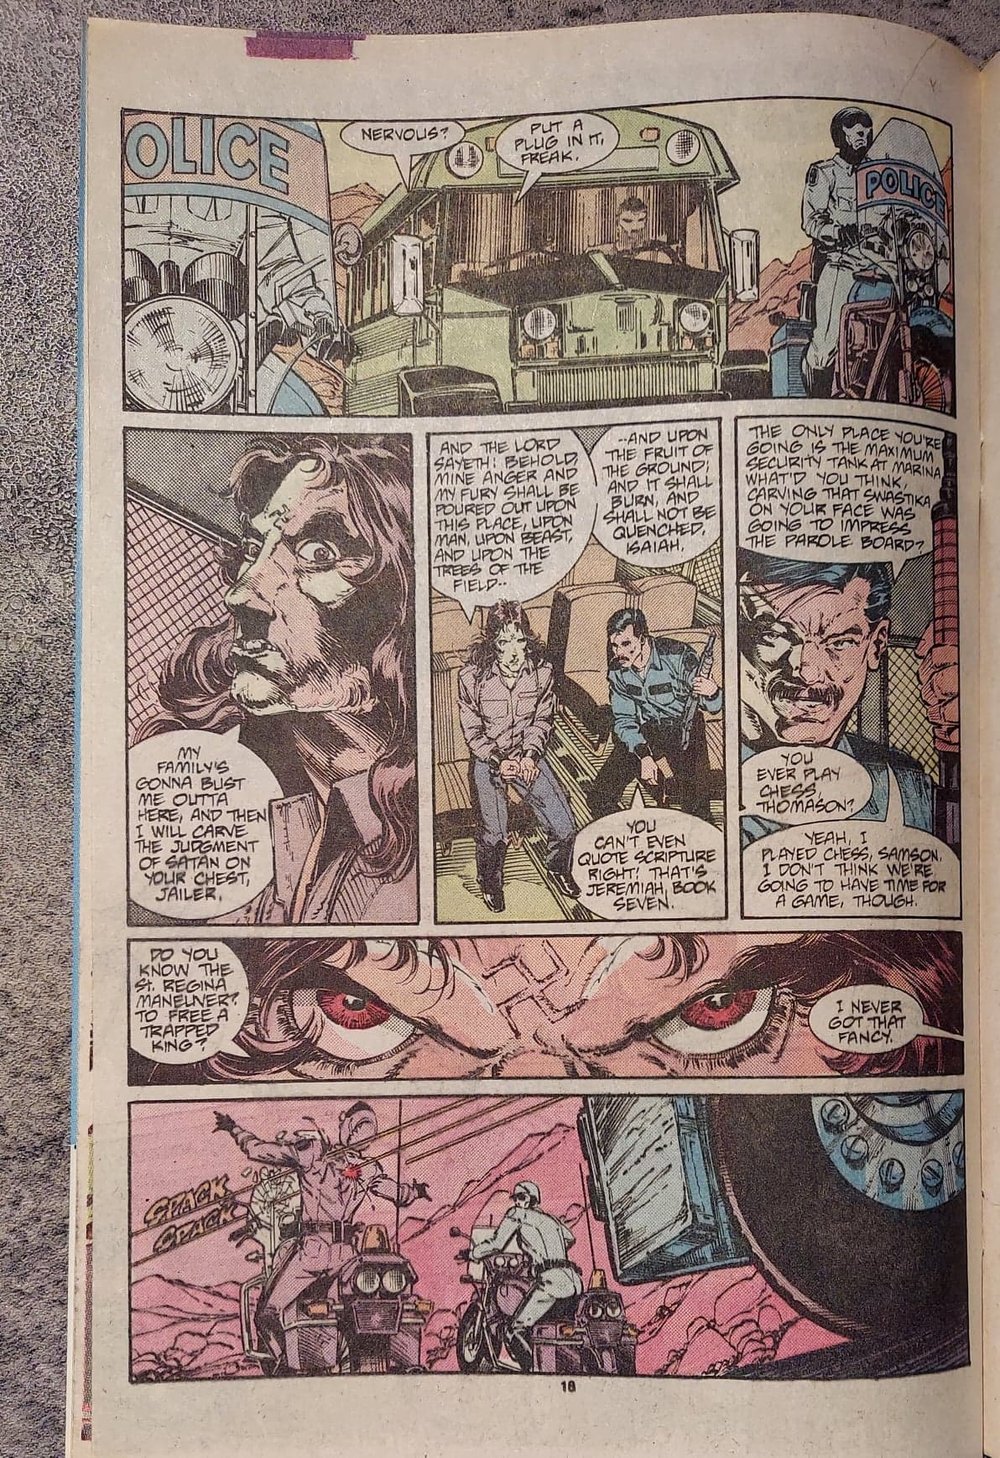 The Punisher #13 from 1988. Featuring the effigy of Charles Manson!